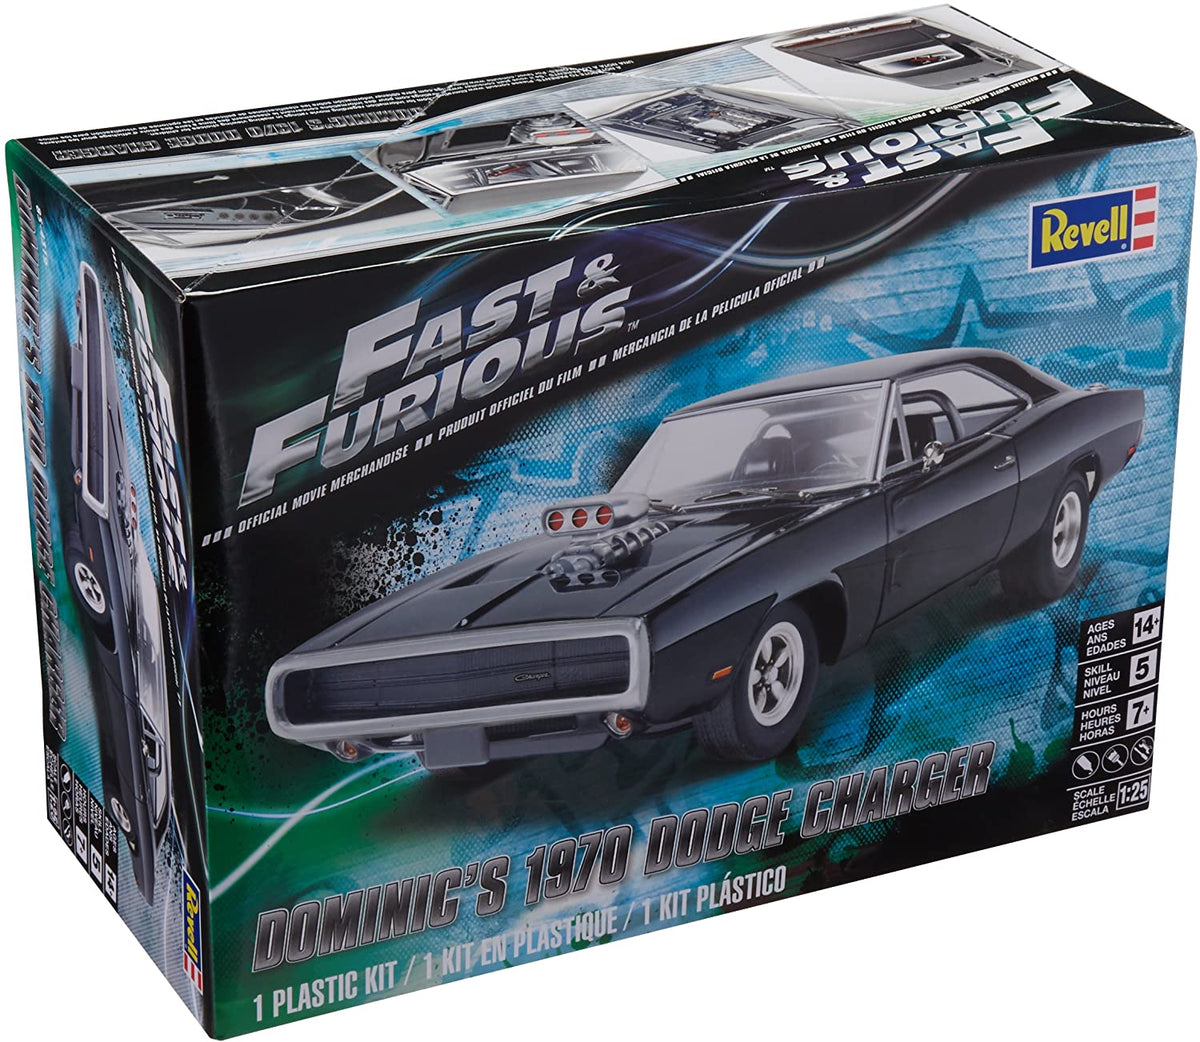 REVELL FAST AND FURIOUS DOMINICS 1970 DODGE CHARGER | REVELL | Toyworld Frankston